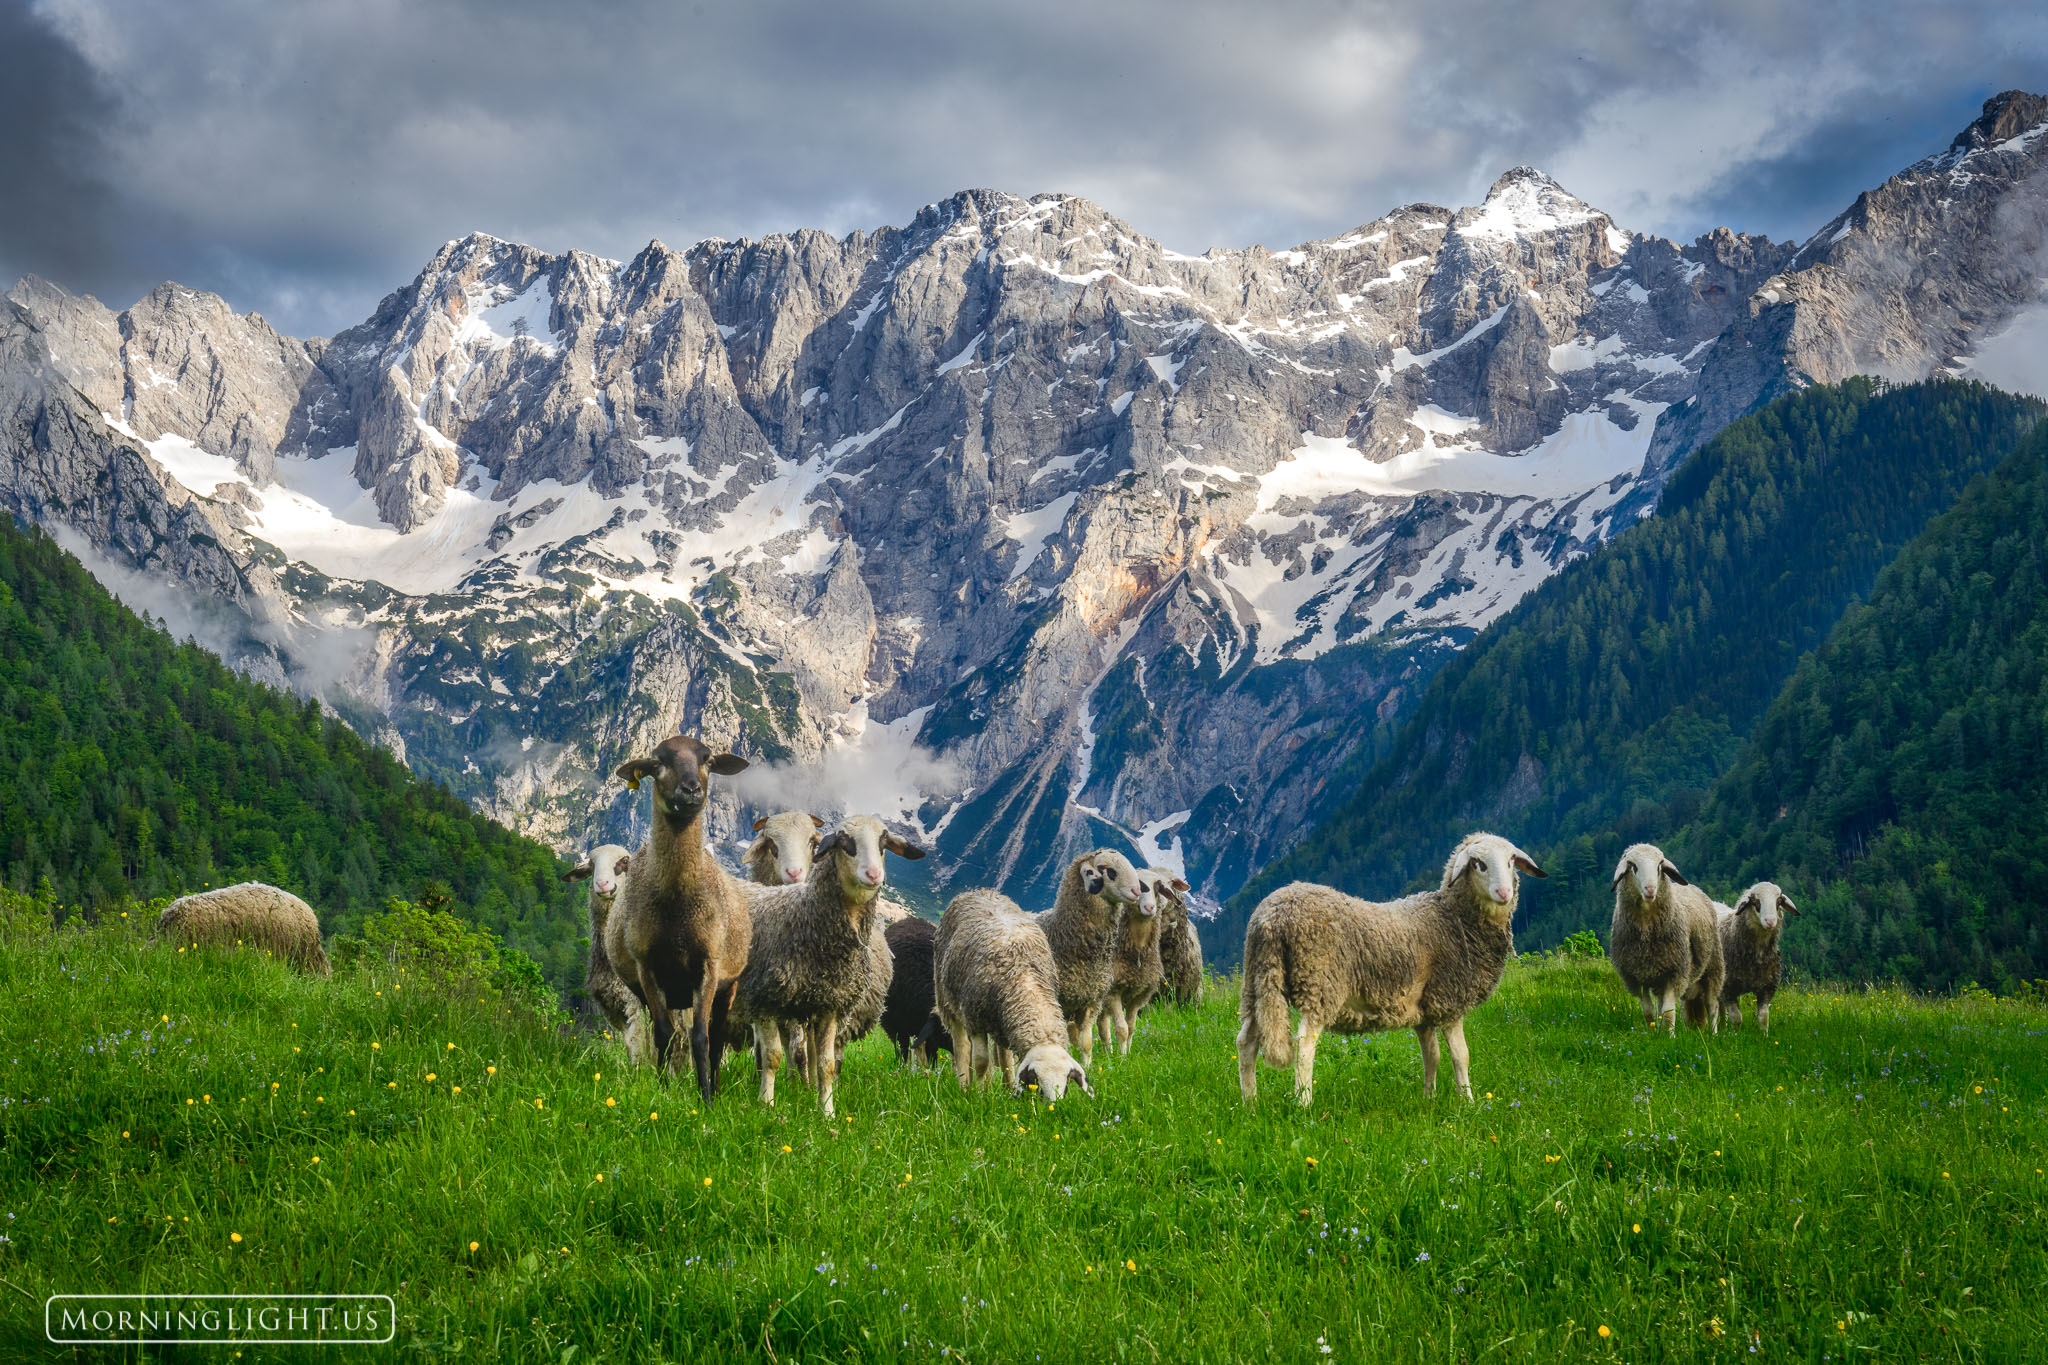 A herd of sheep enjoy life in the Slovenian high country. Can you imagine a better place to be a sheep?